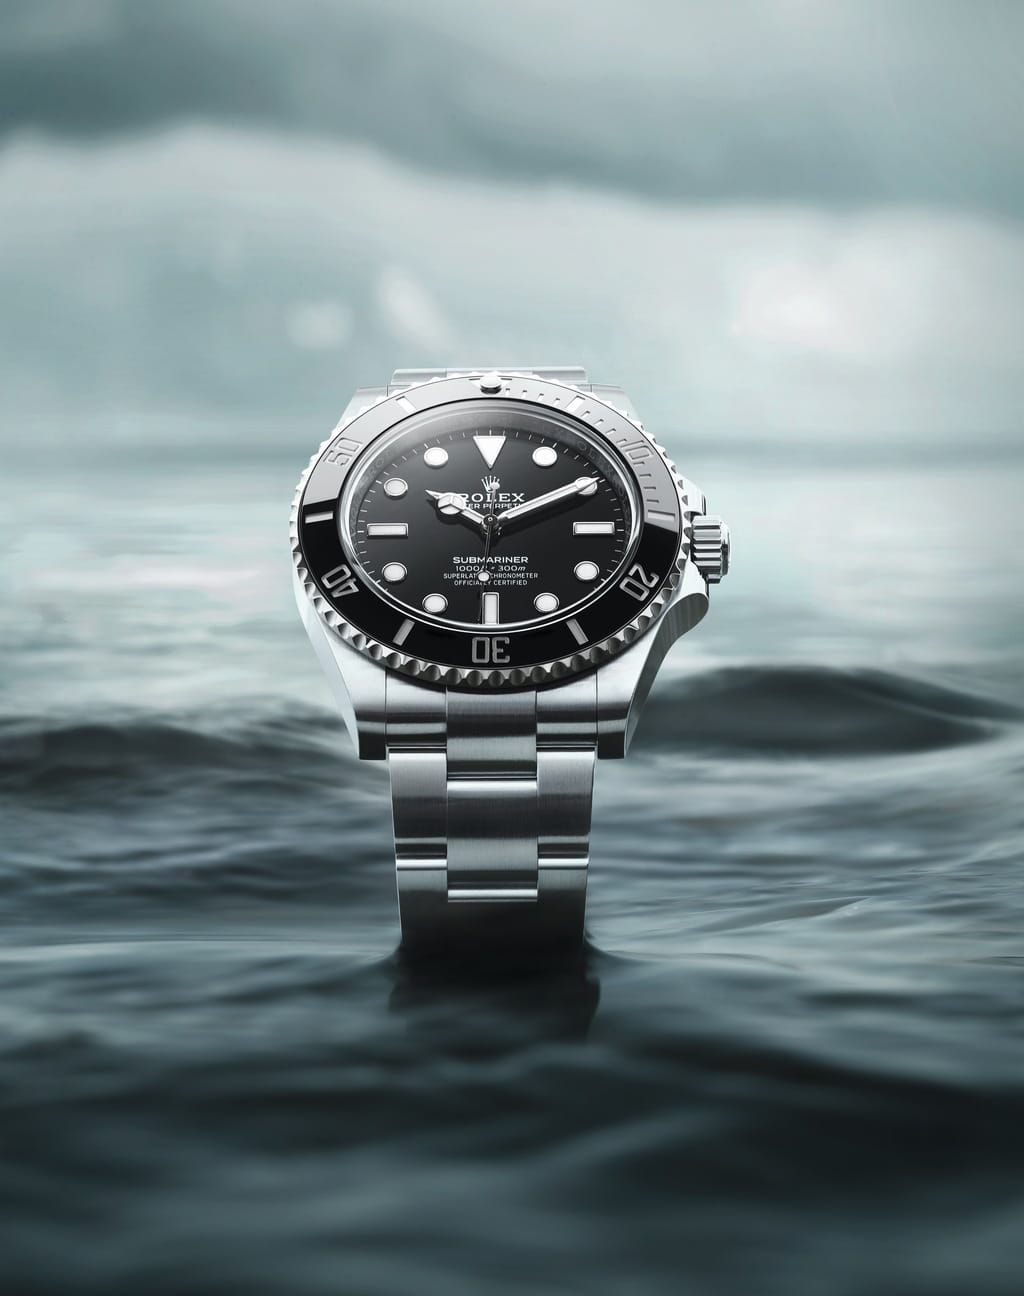 Rolex Oyster Perpetual Submariner 2